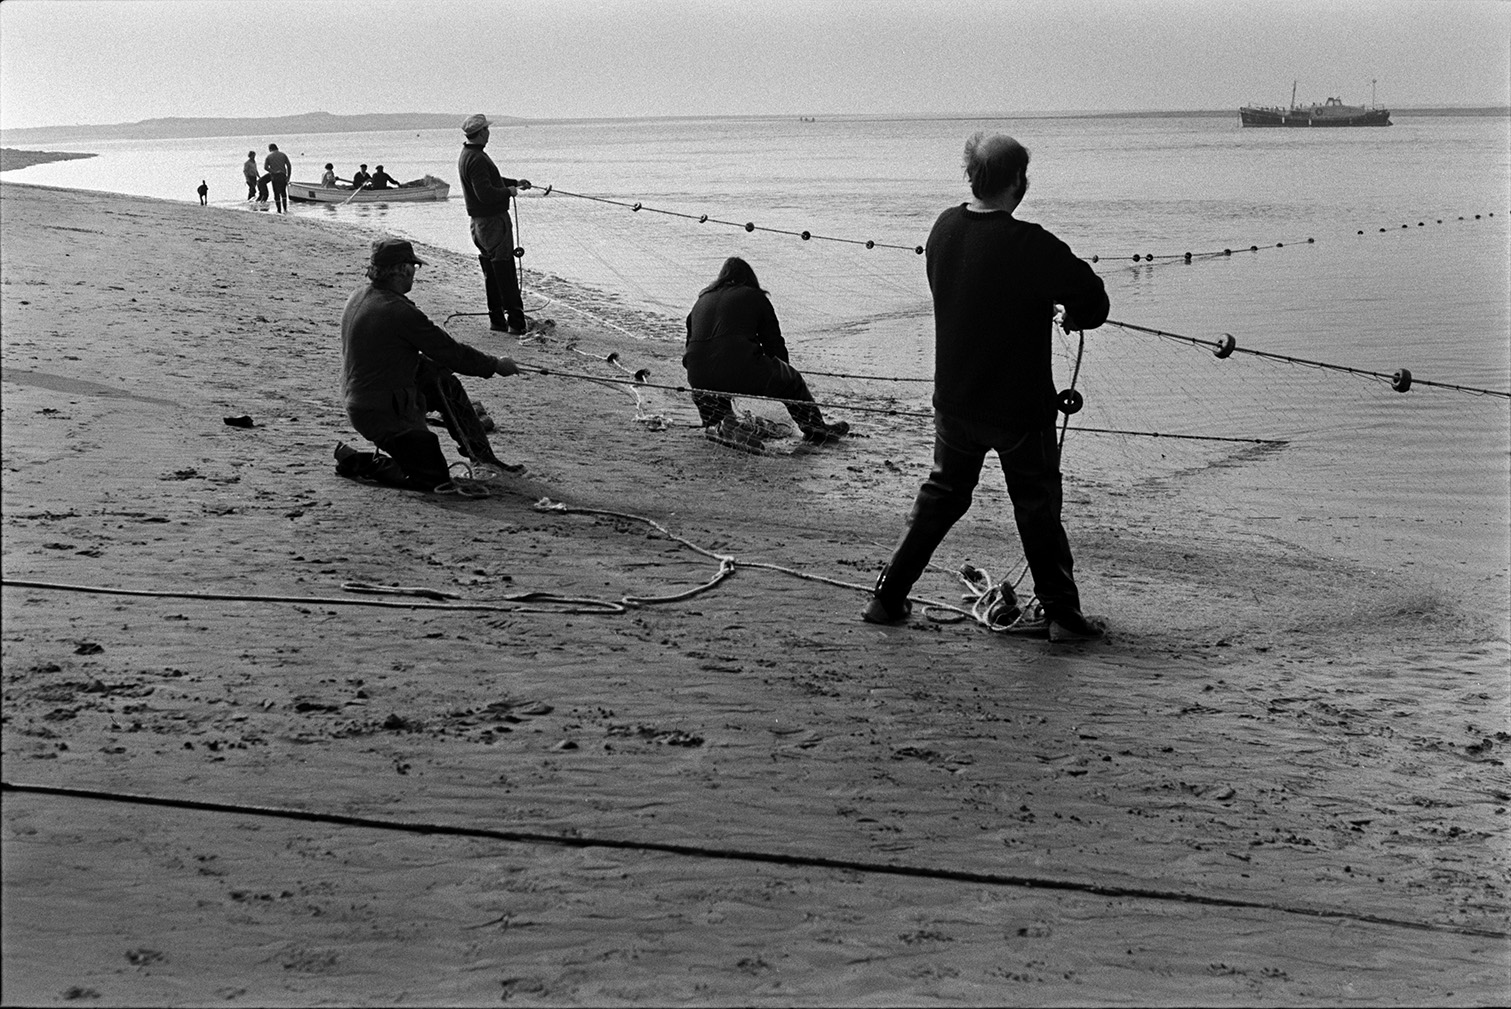 Men netting salmon on a beach front, possibly at Appledore. A ship can be seen on the water and people in a rowing boat are visible in the background.